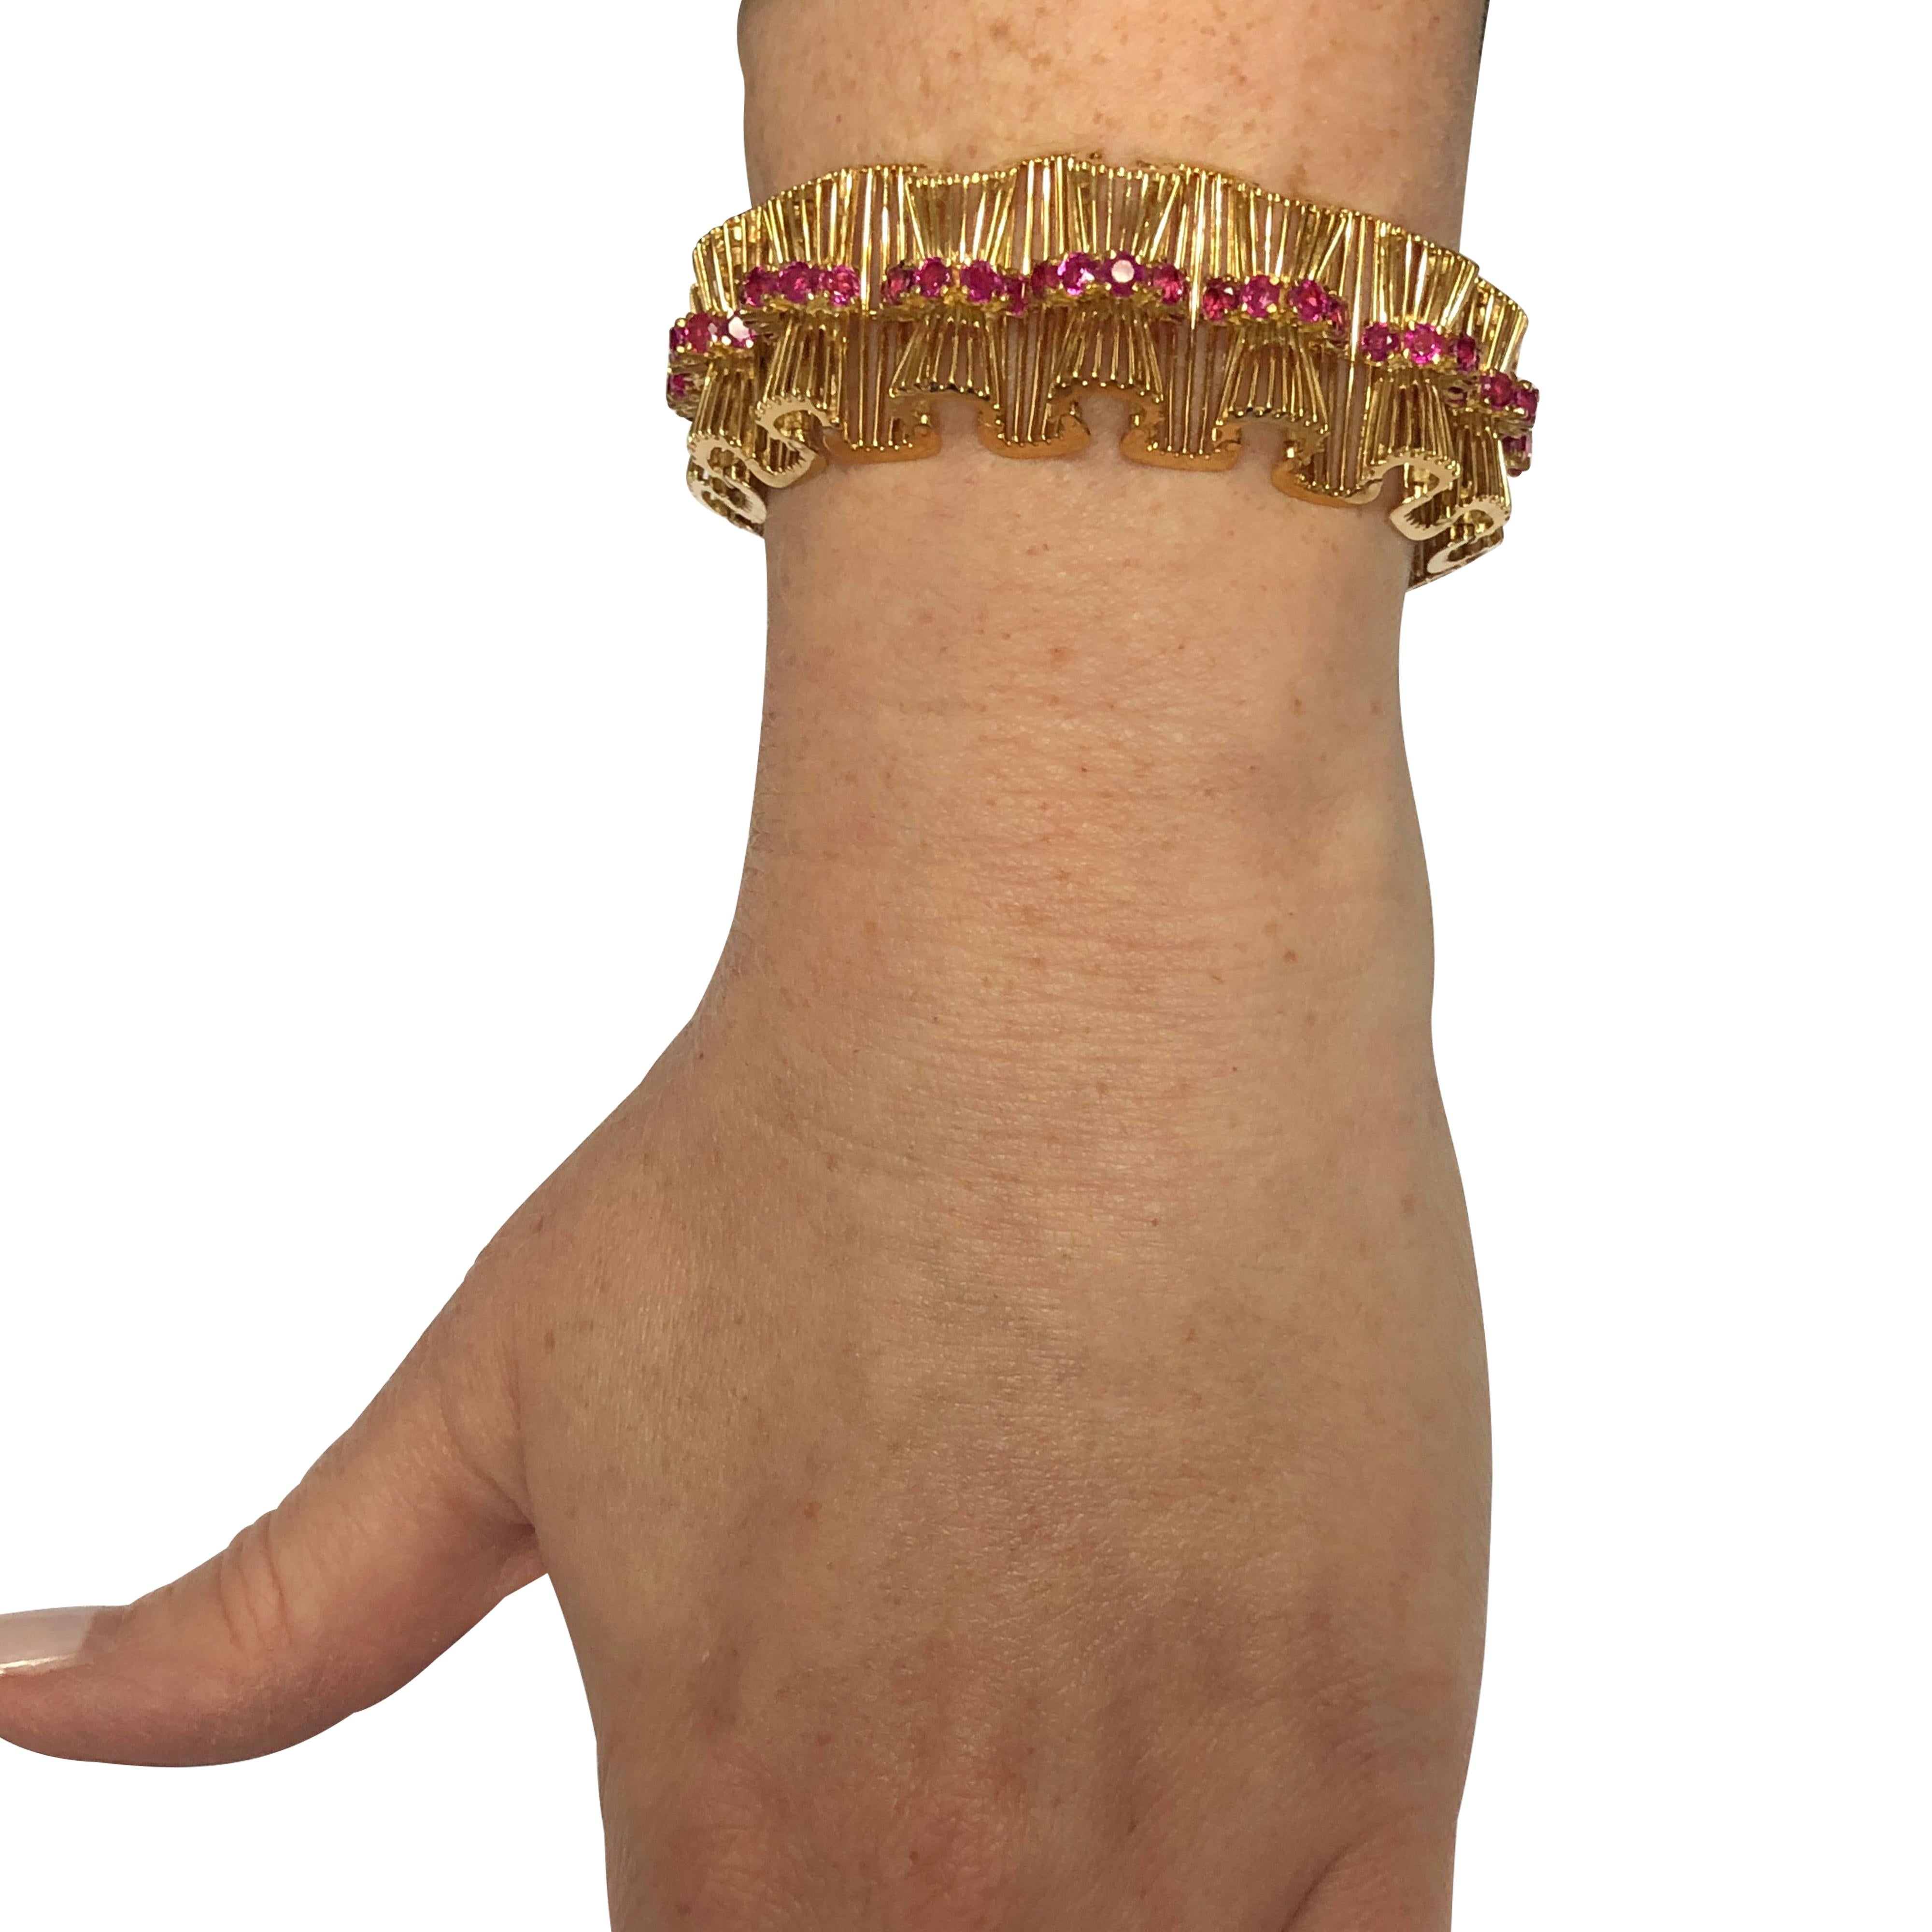 Spectacular Tiffany and Co. retro bracelet, crafted in 18 karat yellow gold, featuring 70 round cut Burma rubies weighing approximately 8 carats total. This stunning bracelet resembles a ruffled ribbon, laced with Burma ruby detail, creating a